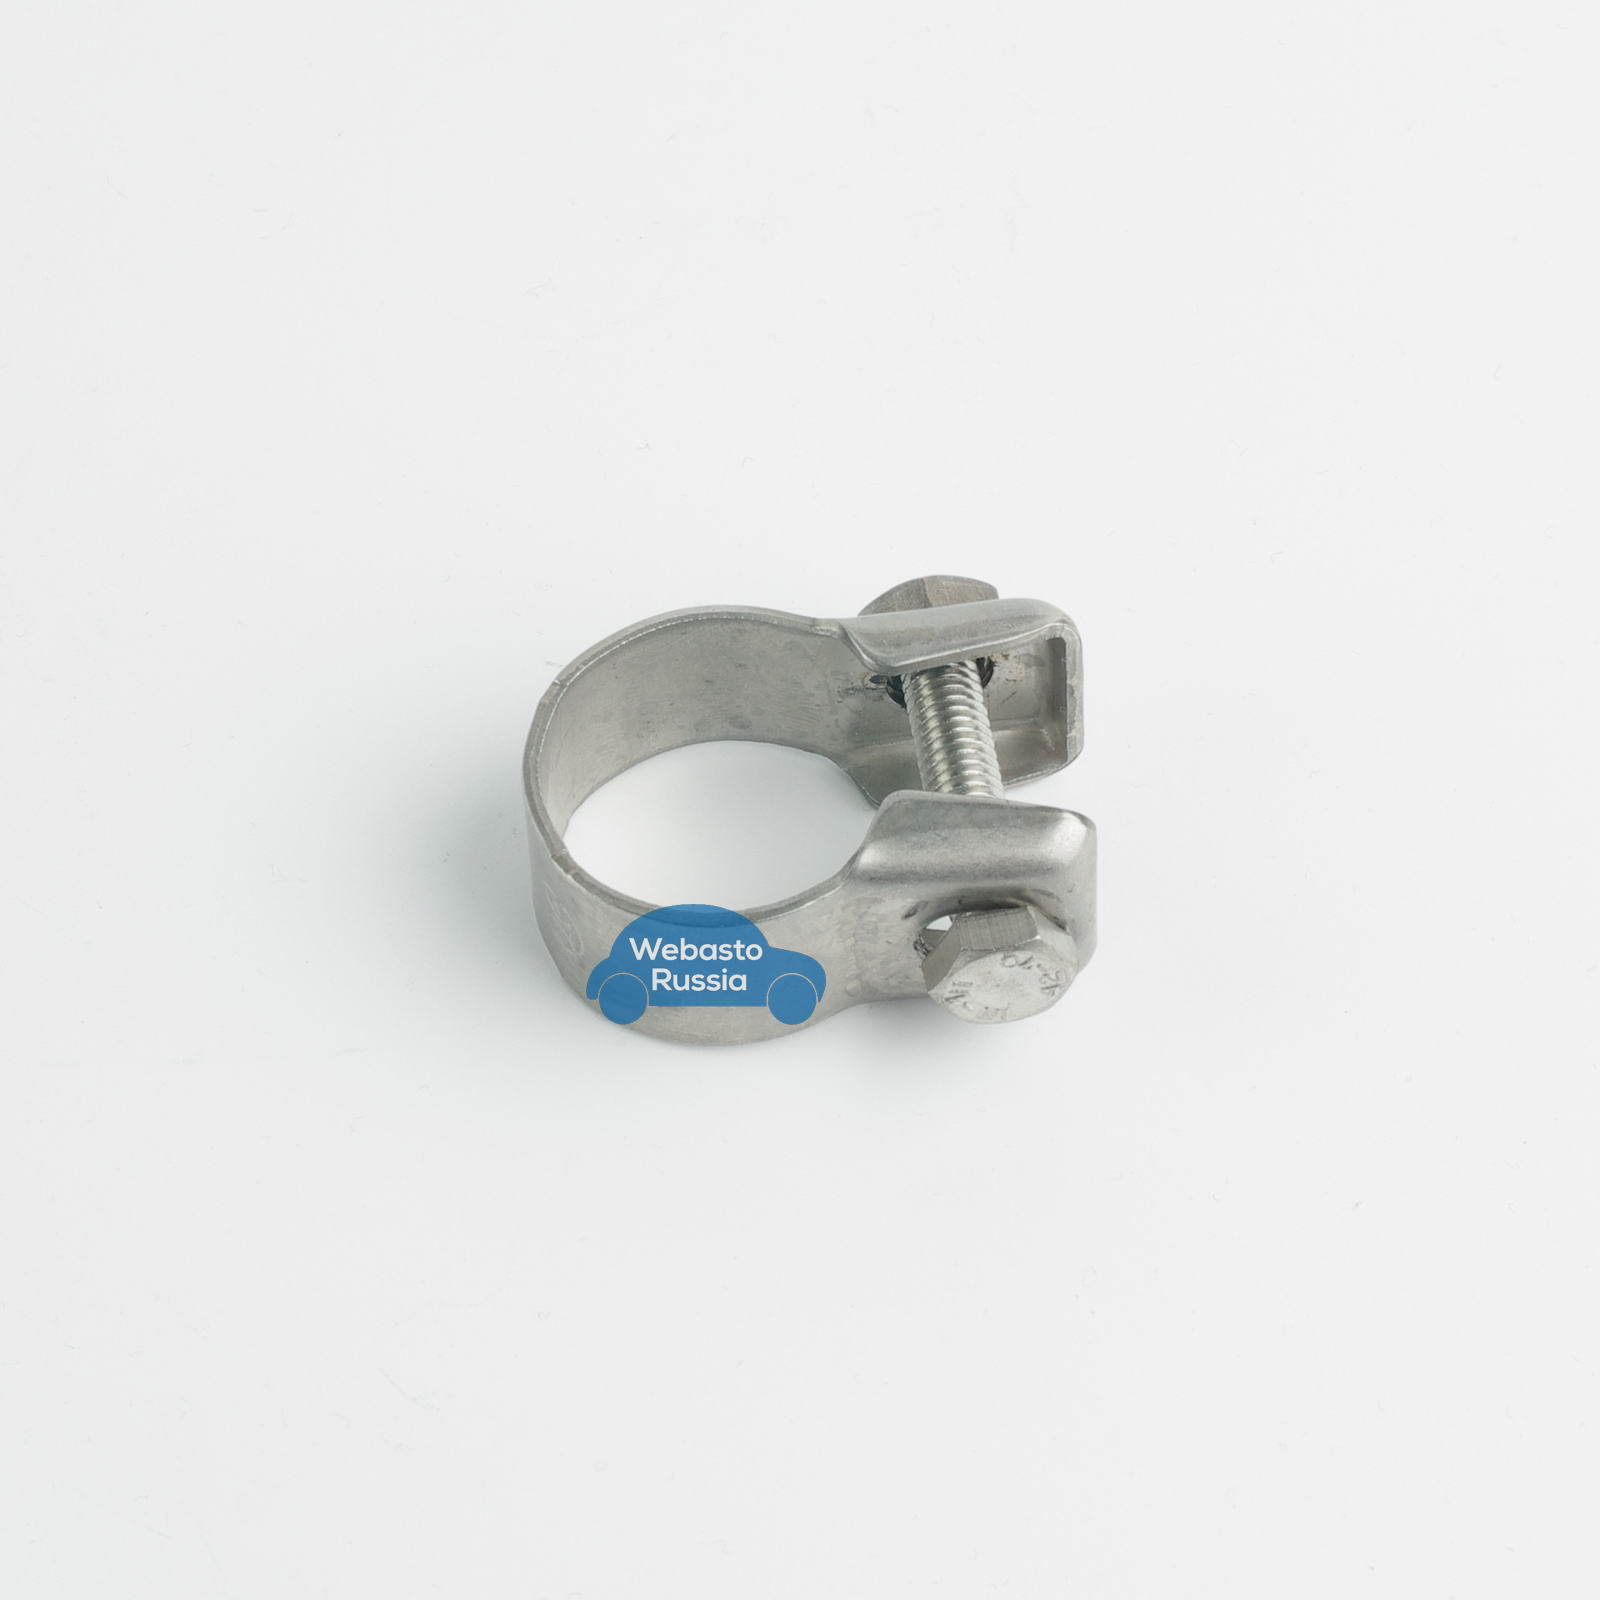 Webasto Exhaust hose Clamp for 24mm - 26mm